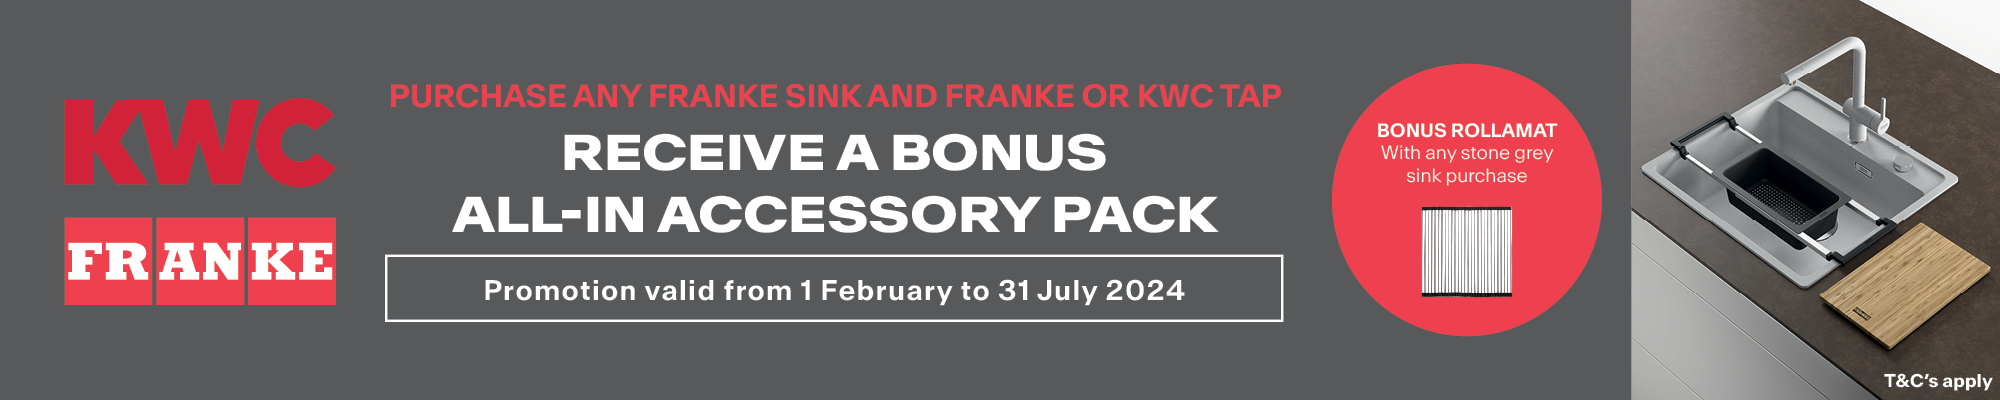 Bonus All-in Accessory Pack* When You Purchase A Franke Sink and Franke or KWC Tap